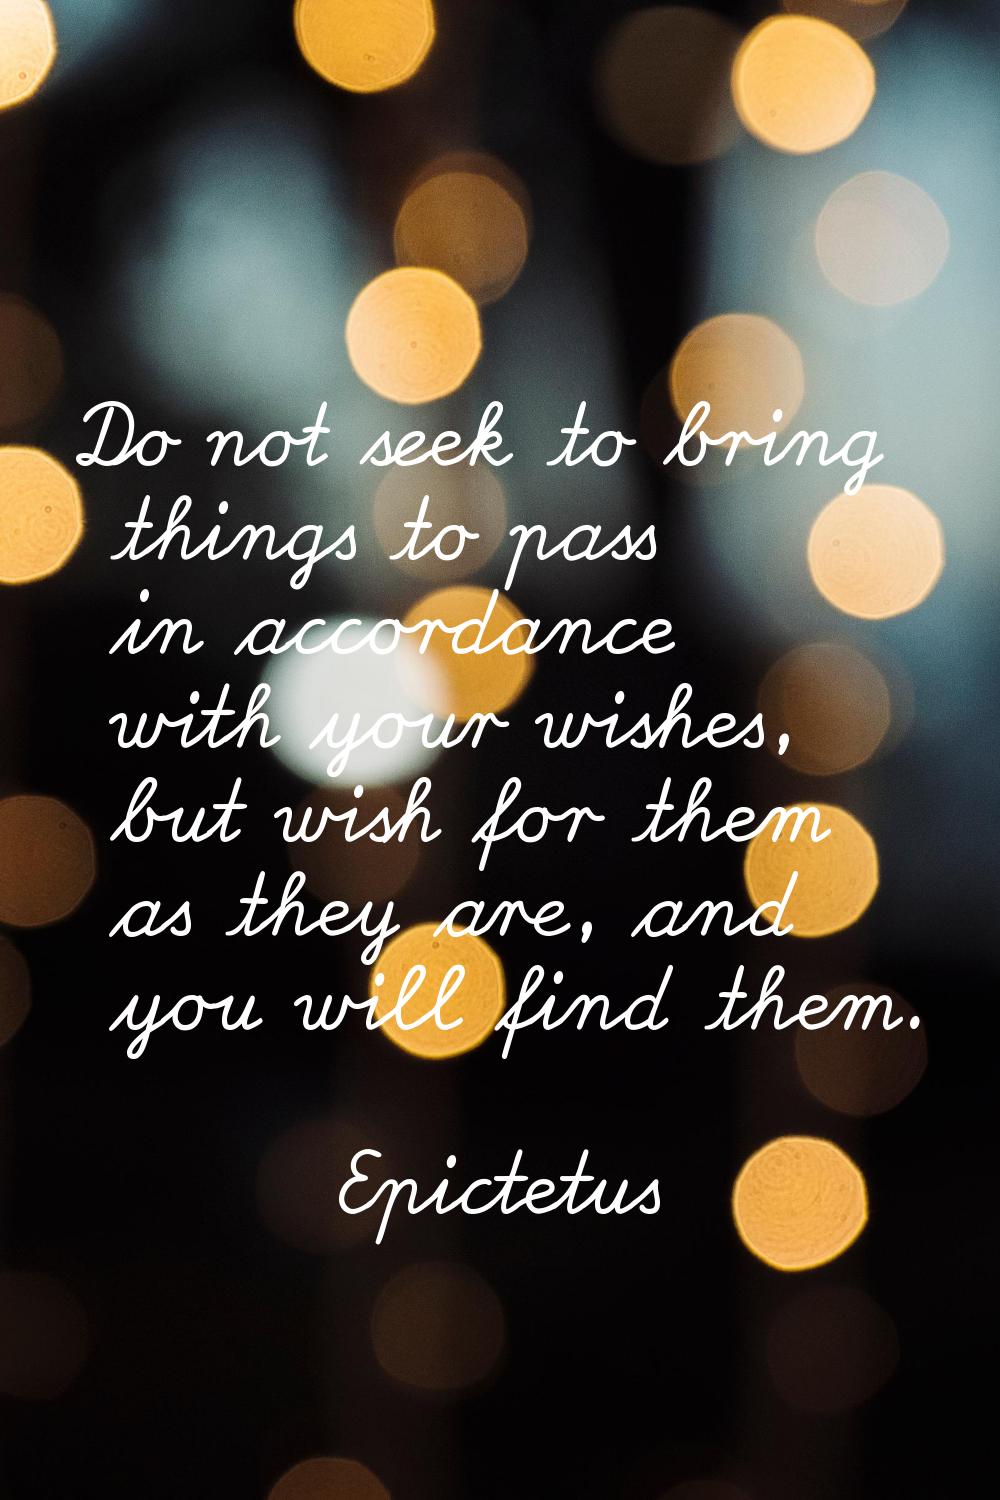 Do not seek to bring things to pass in accordance with your wishes, but wish for them as they are, 